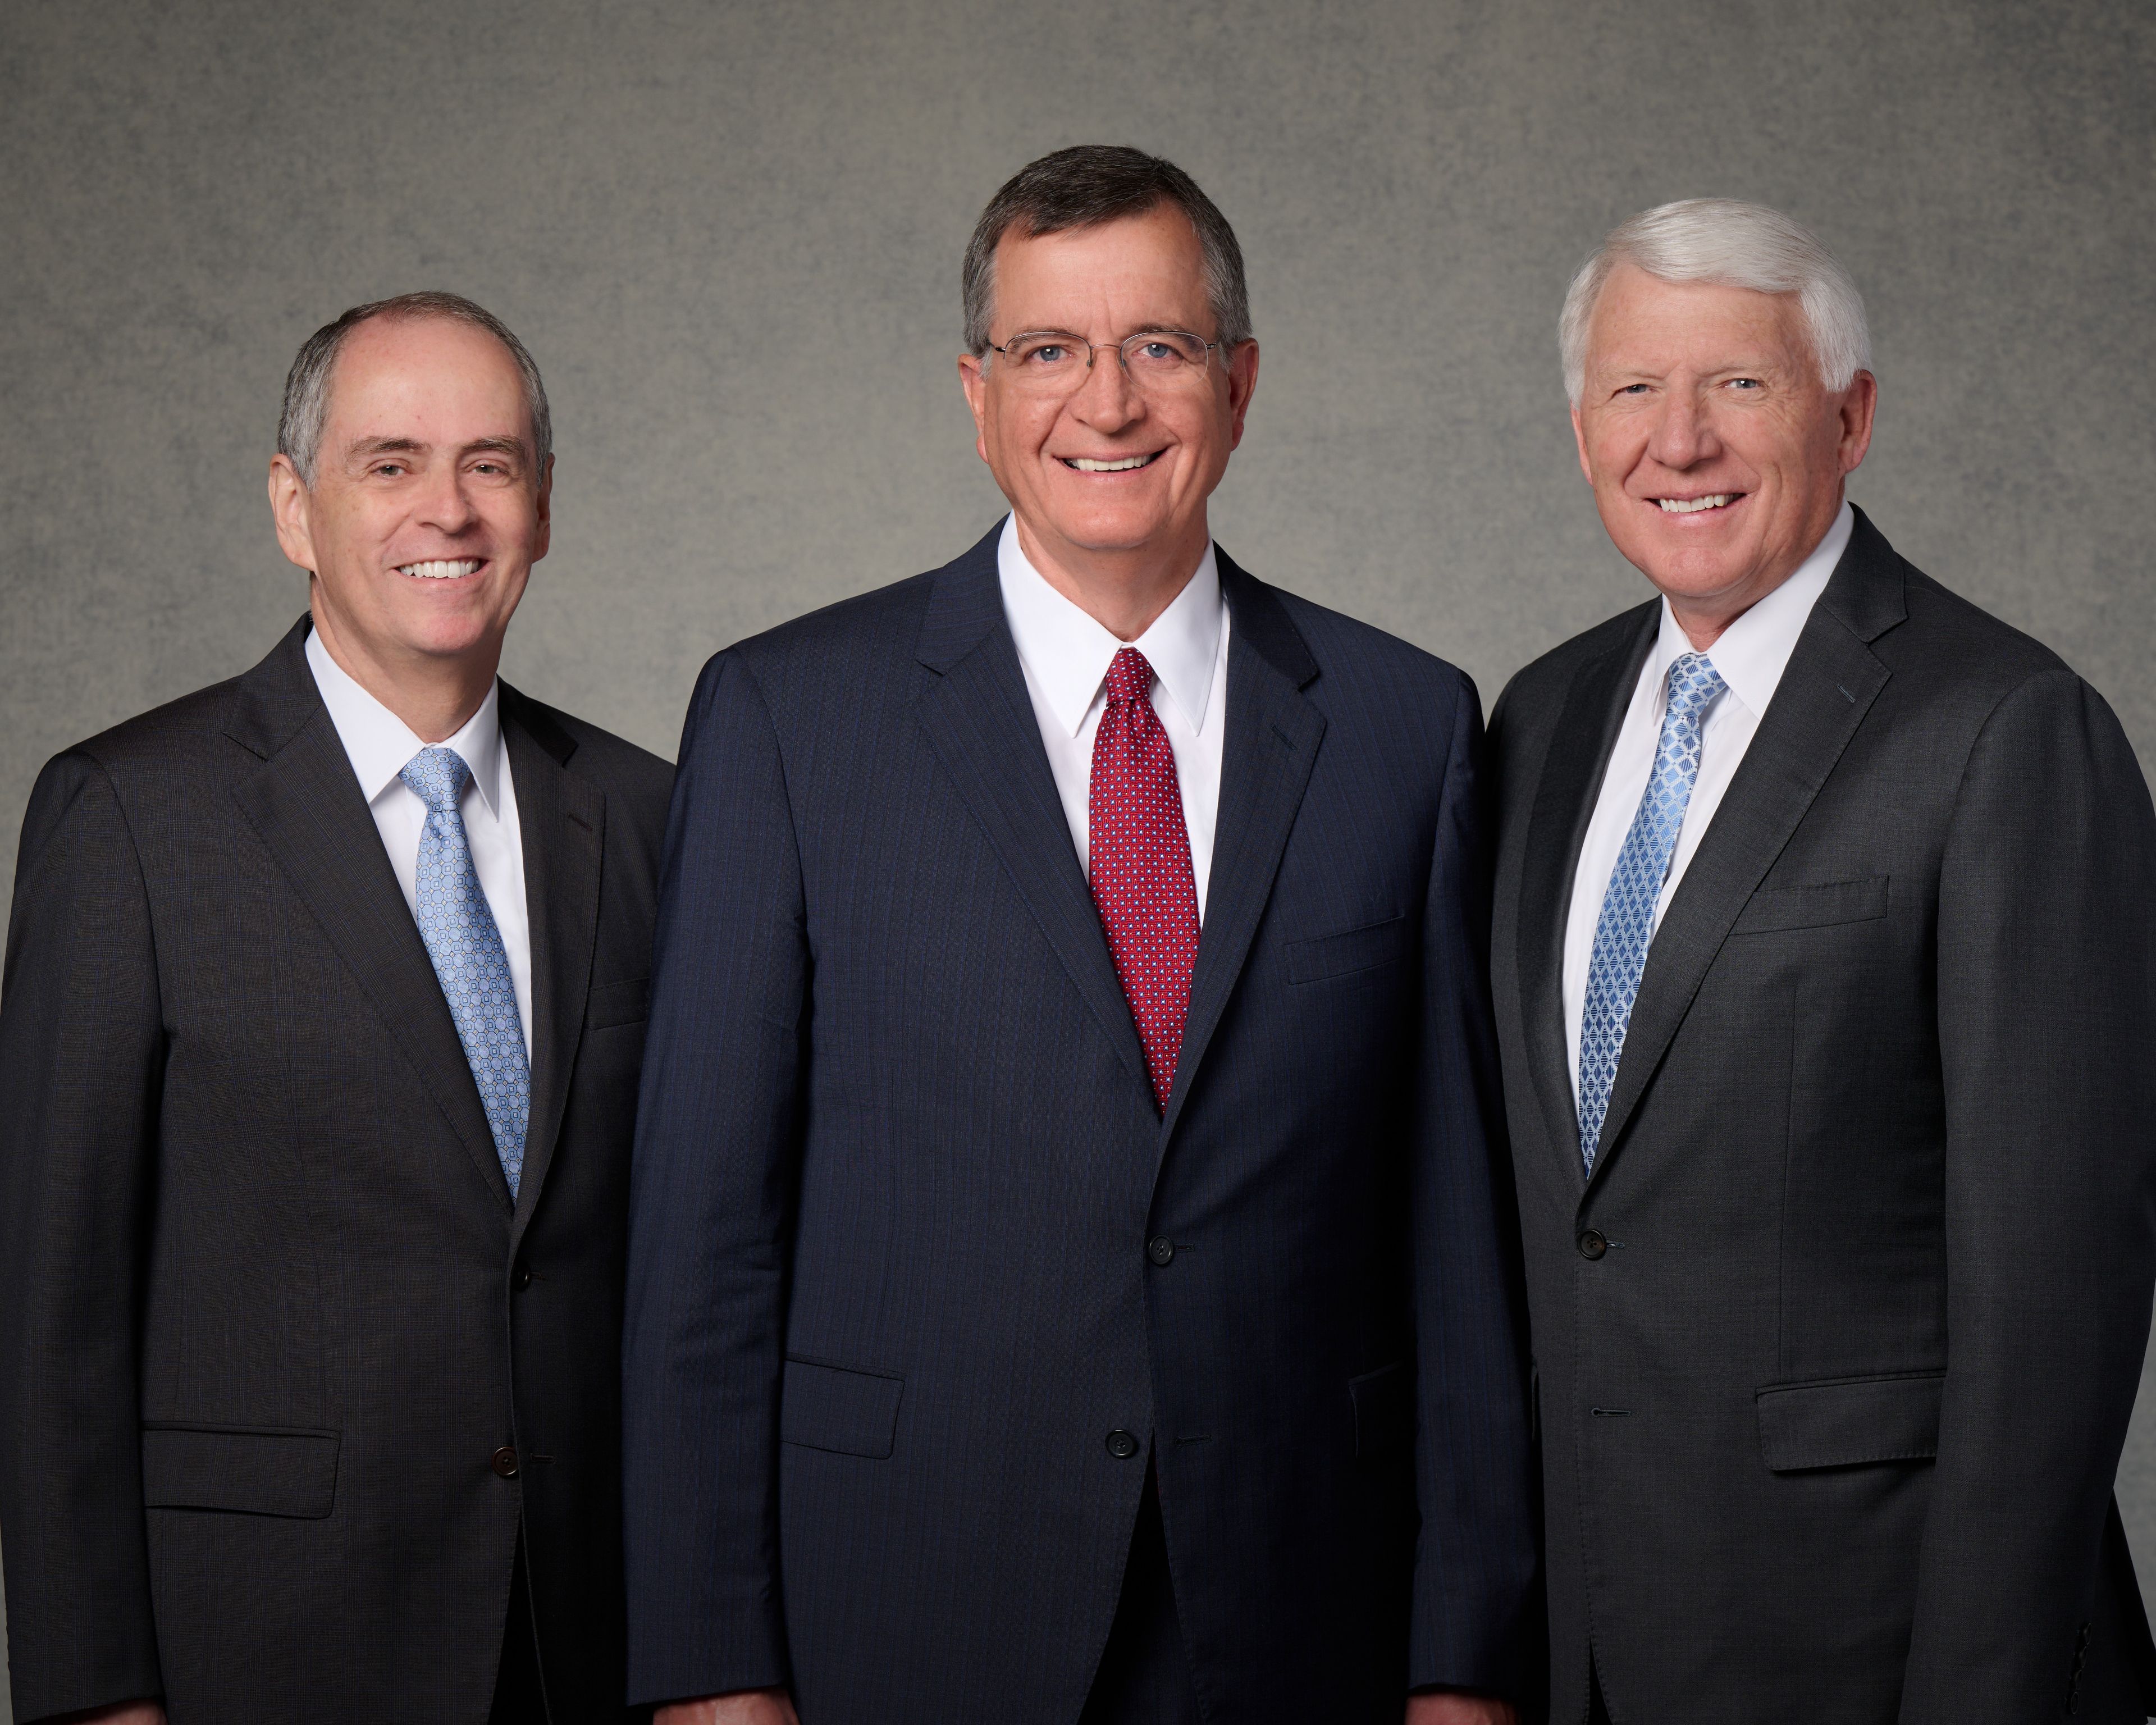 Sunday School General Presidency: Mark L. Pace, President; Milton Camargo, First Counselor; and Jan E. Newman, Second Counselor of the Sunday School General Presidency were called in April 2019 (official portrait: August 2022). 